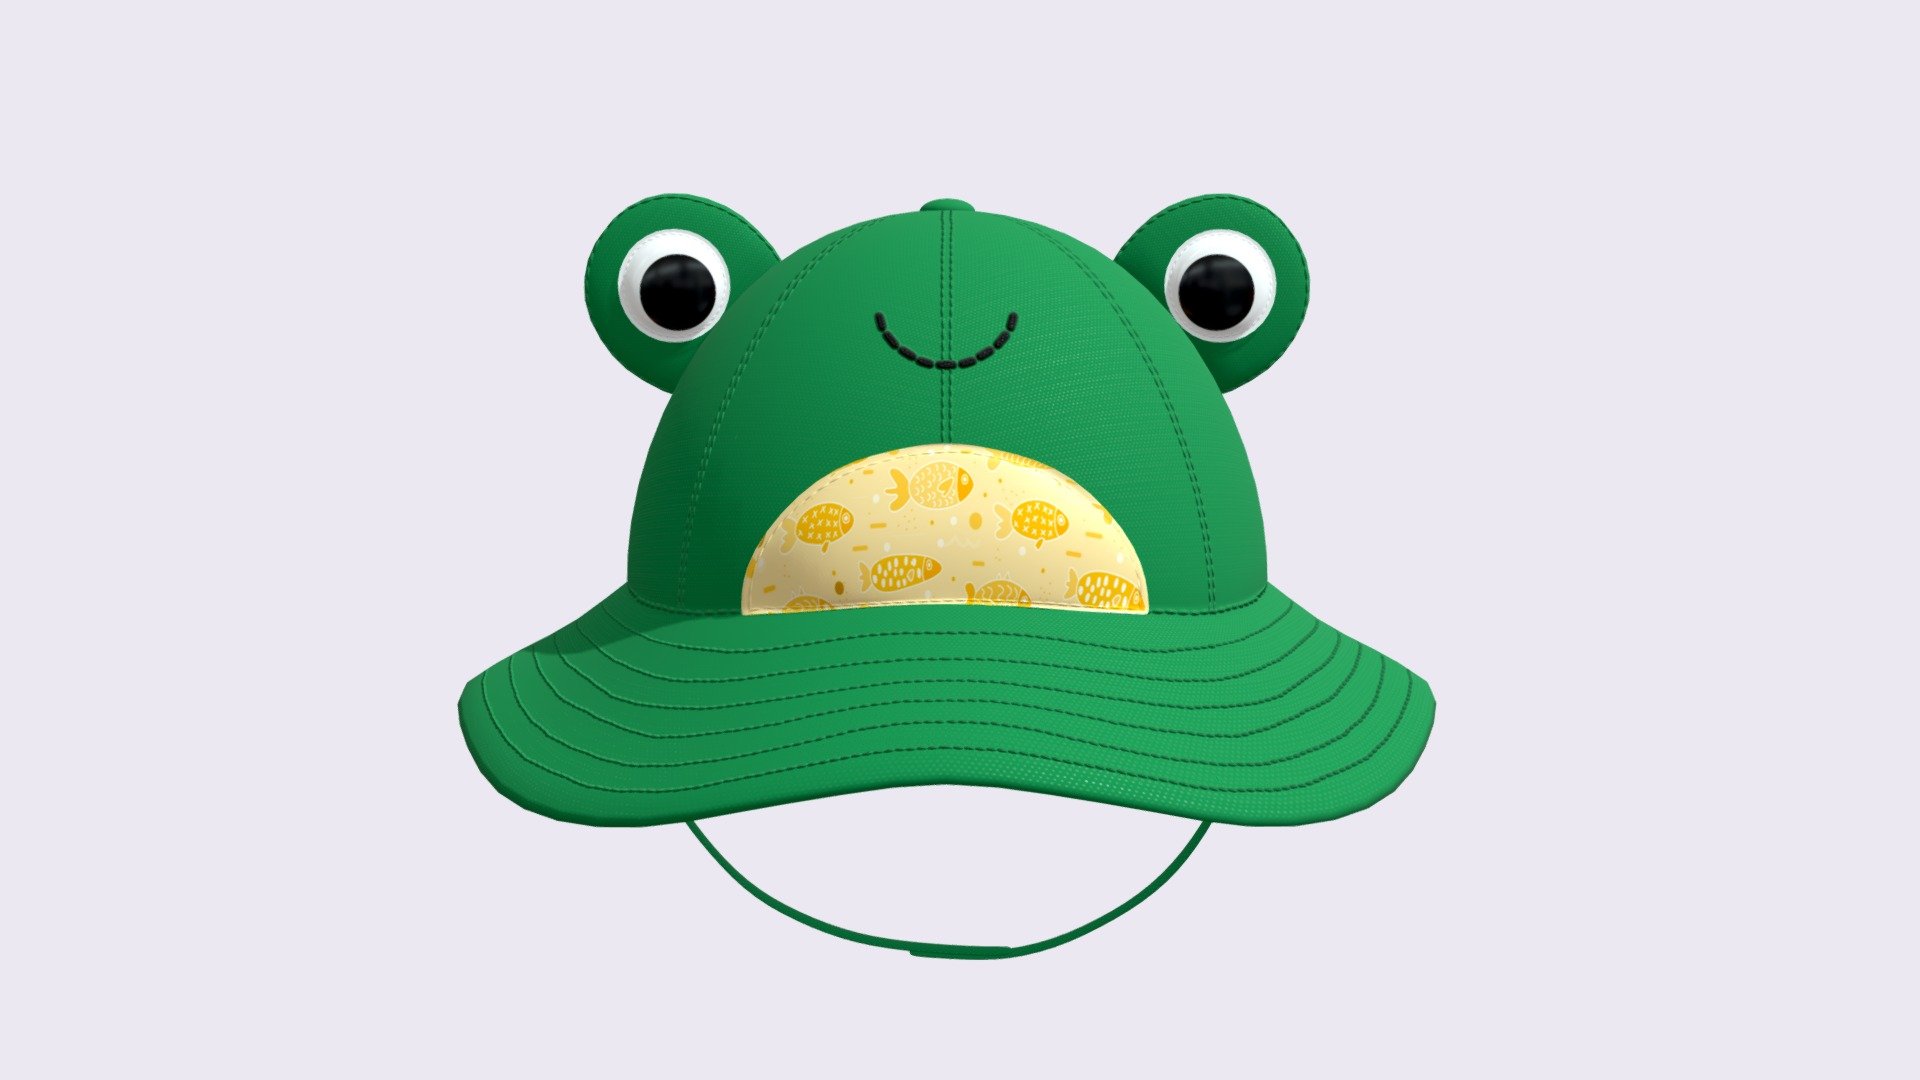 Cute Hat made with Blender



More images of this 3D model in my portfolio:

https://www.artstation.com/artwork/G8WPEz - Cartoon Frog Panama Hat - Buy Royalty Free 3D model by Starkosha 3d model